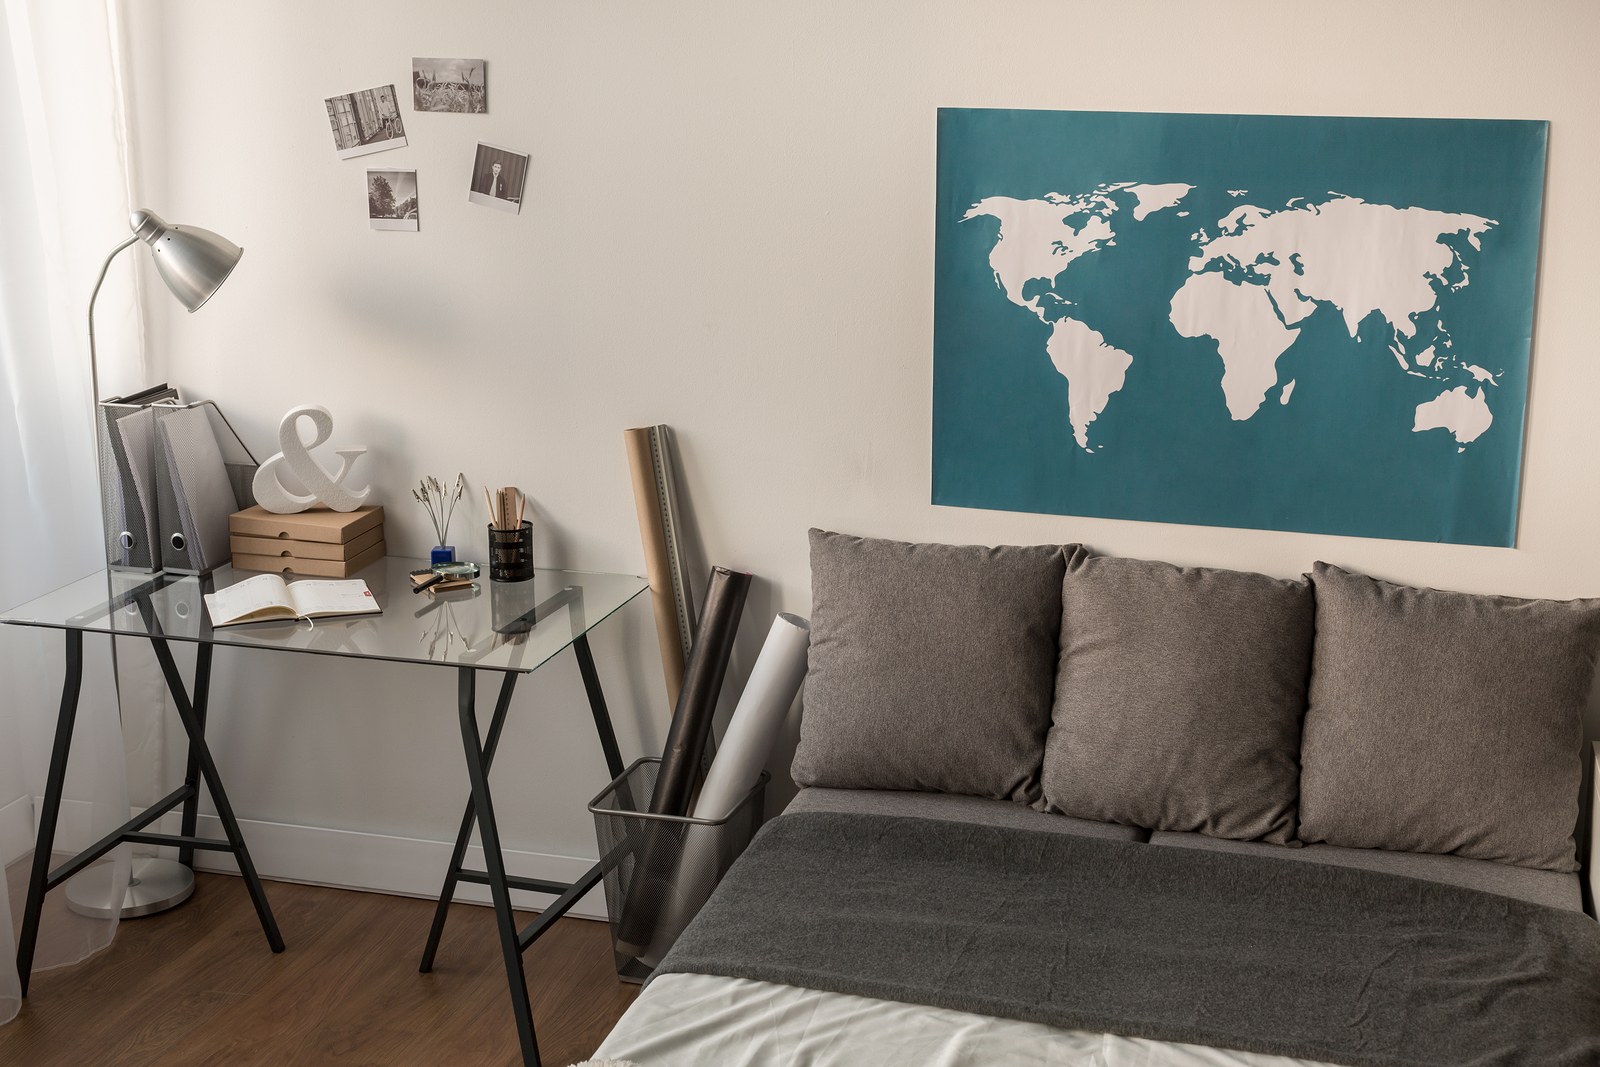 What Are the Best Ways of Creating Cool Dorm Wall Decor on the Cheap?